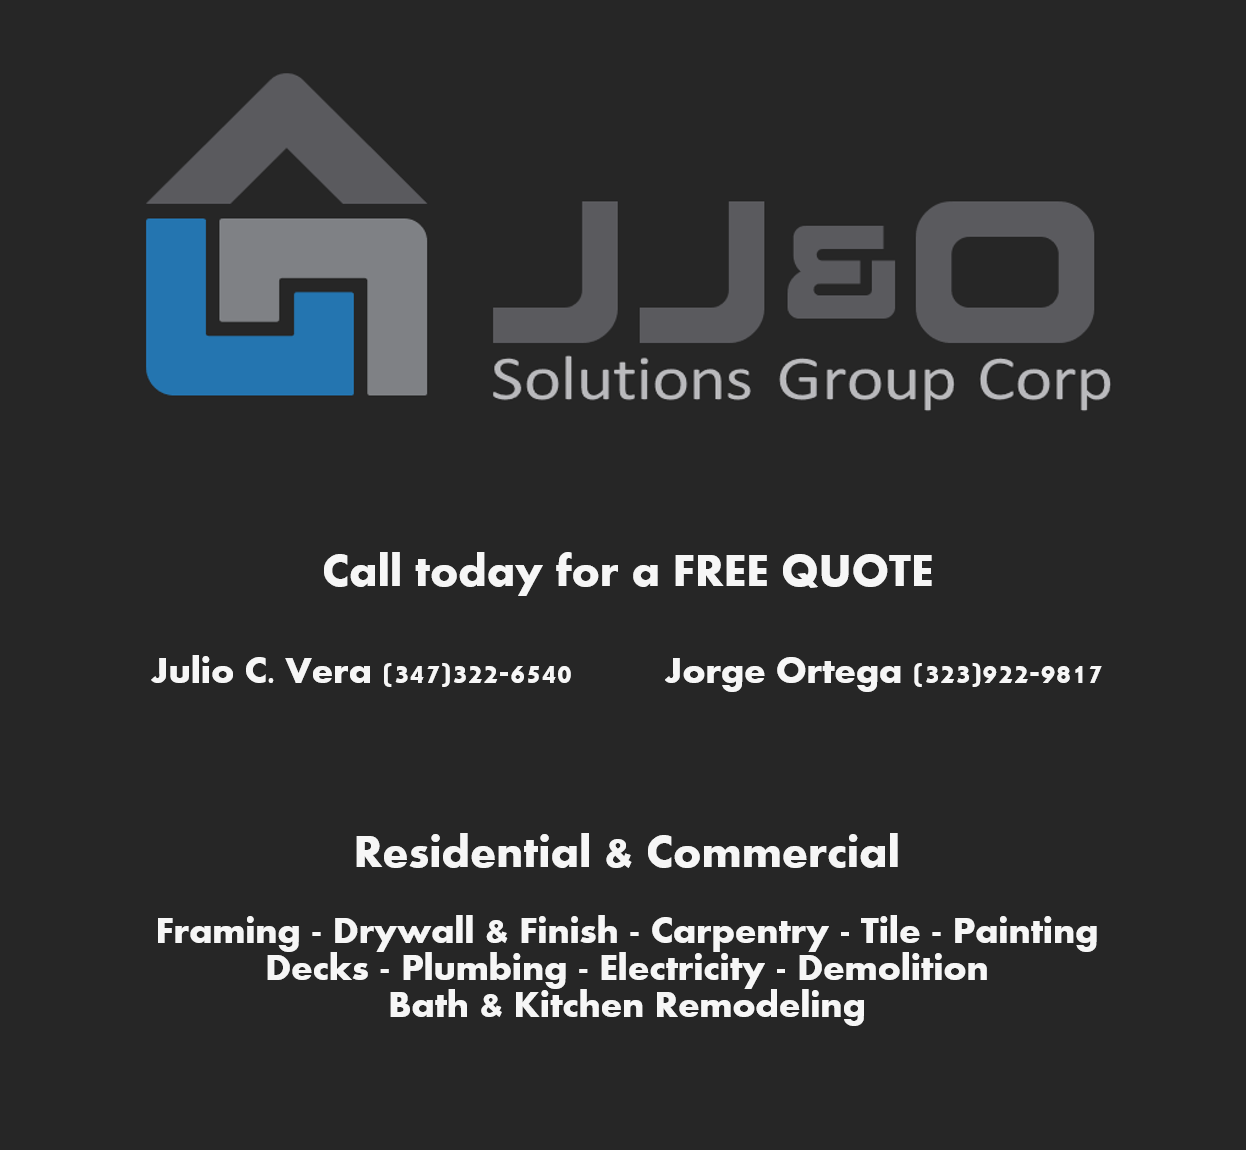 JJ&O Solutions Group Corp Logo